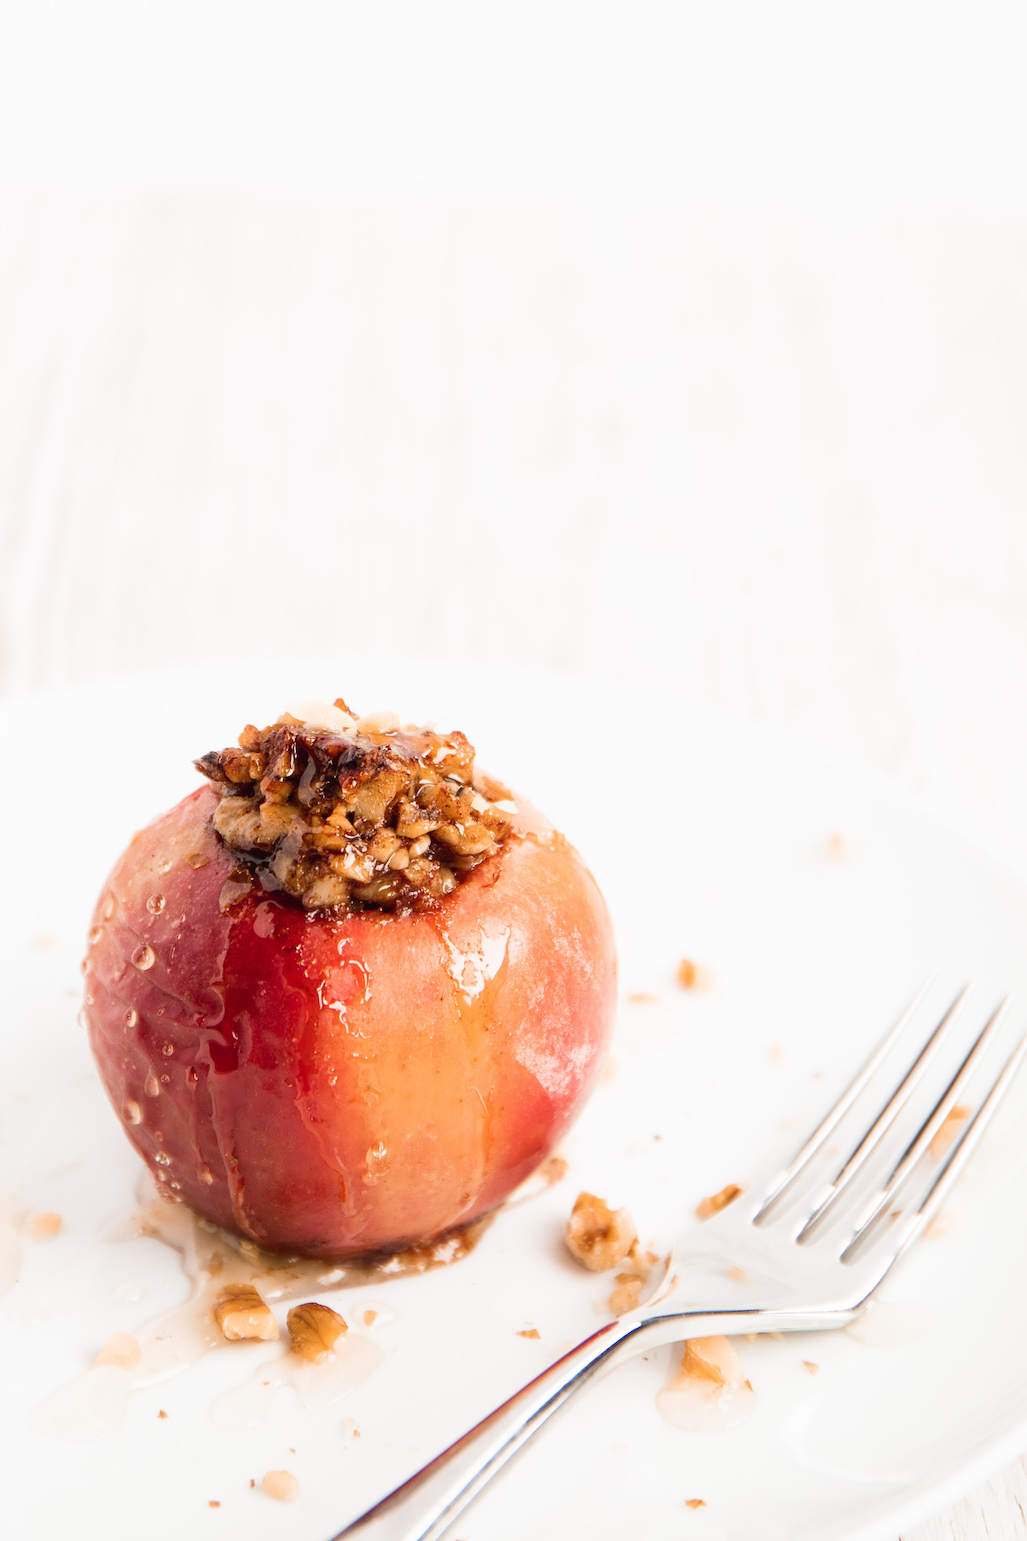 Easy Baked Apples with Walnuts